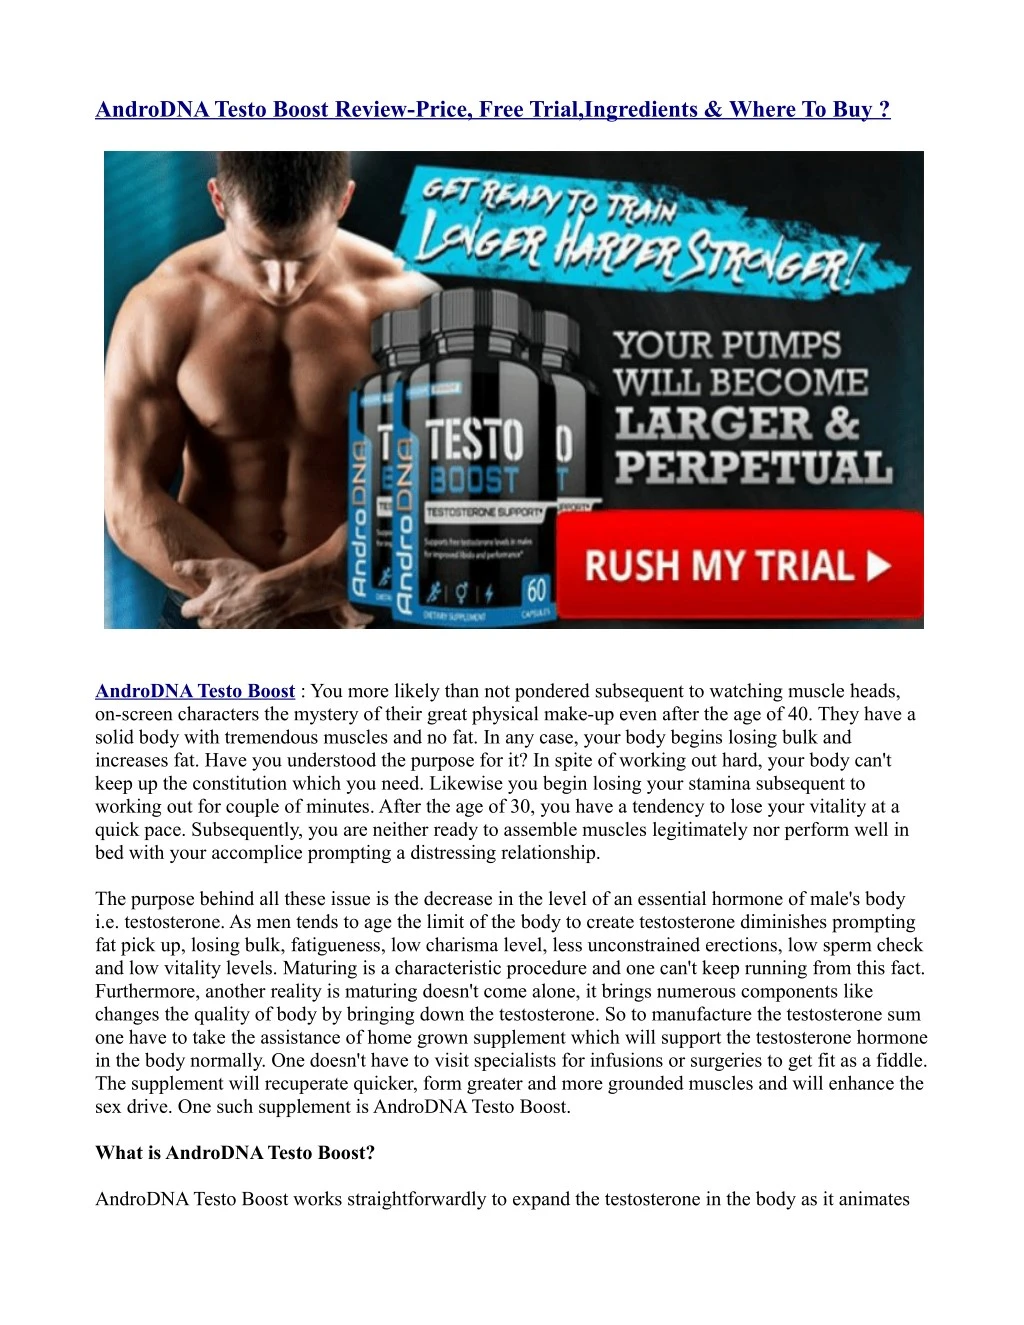 androdna testo boost review price free trial